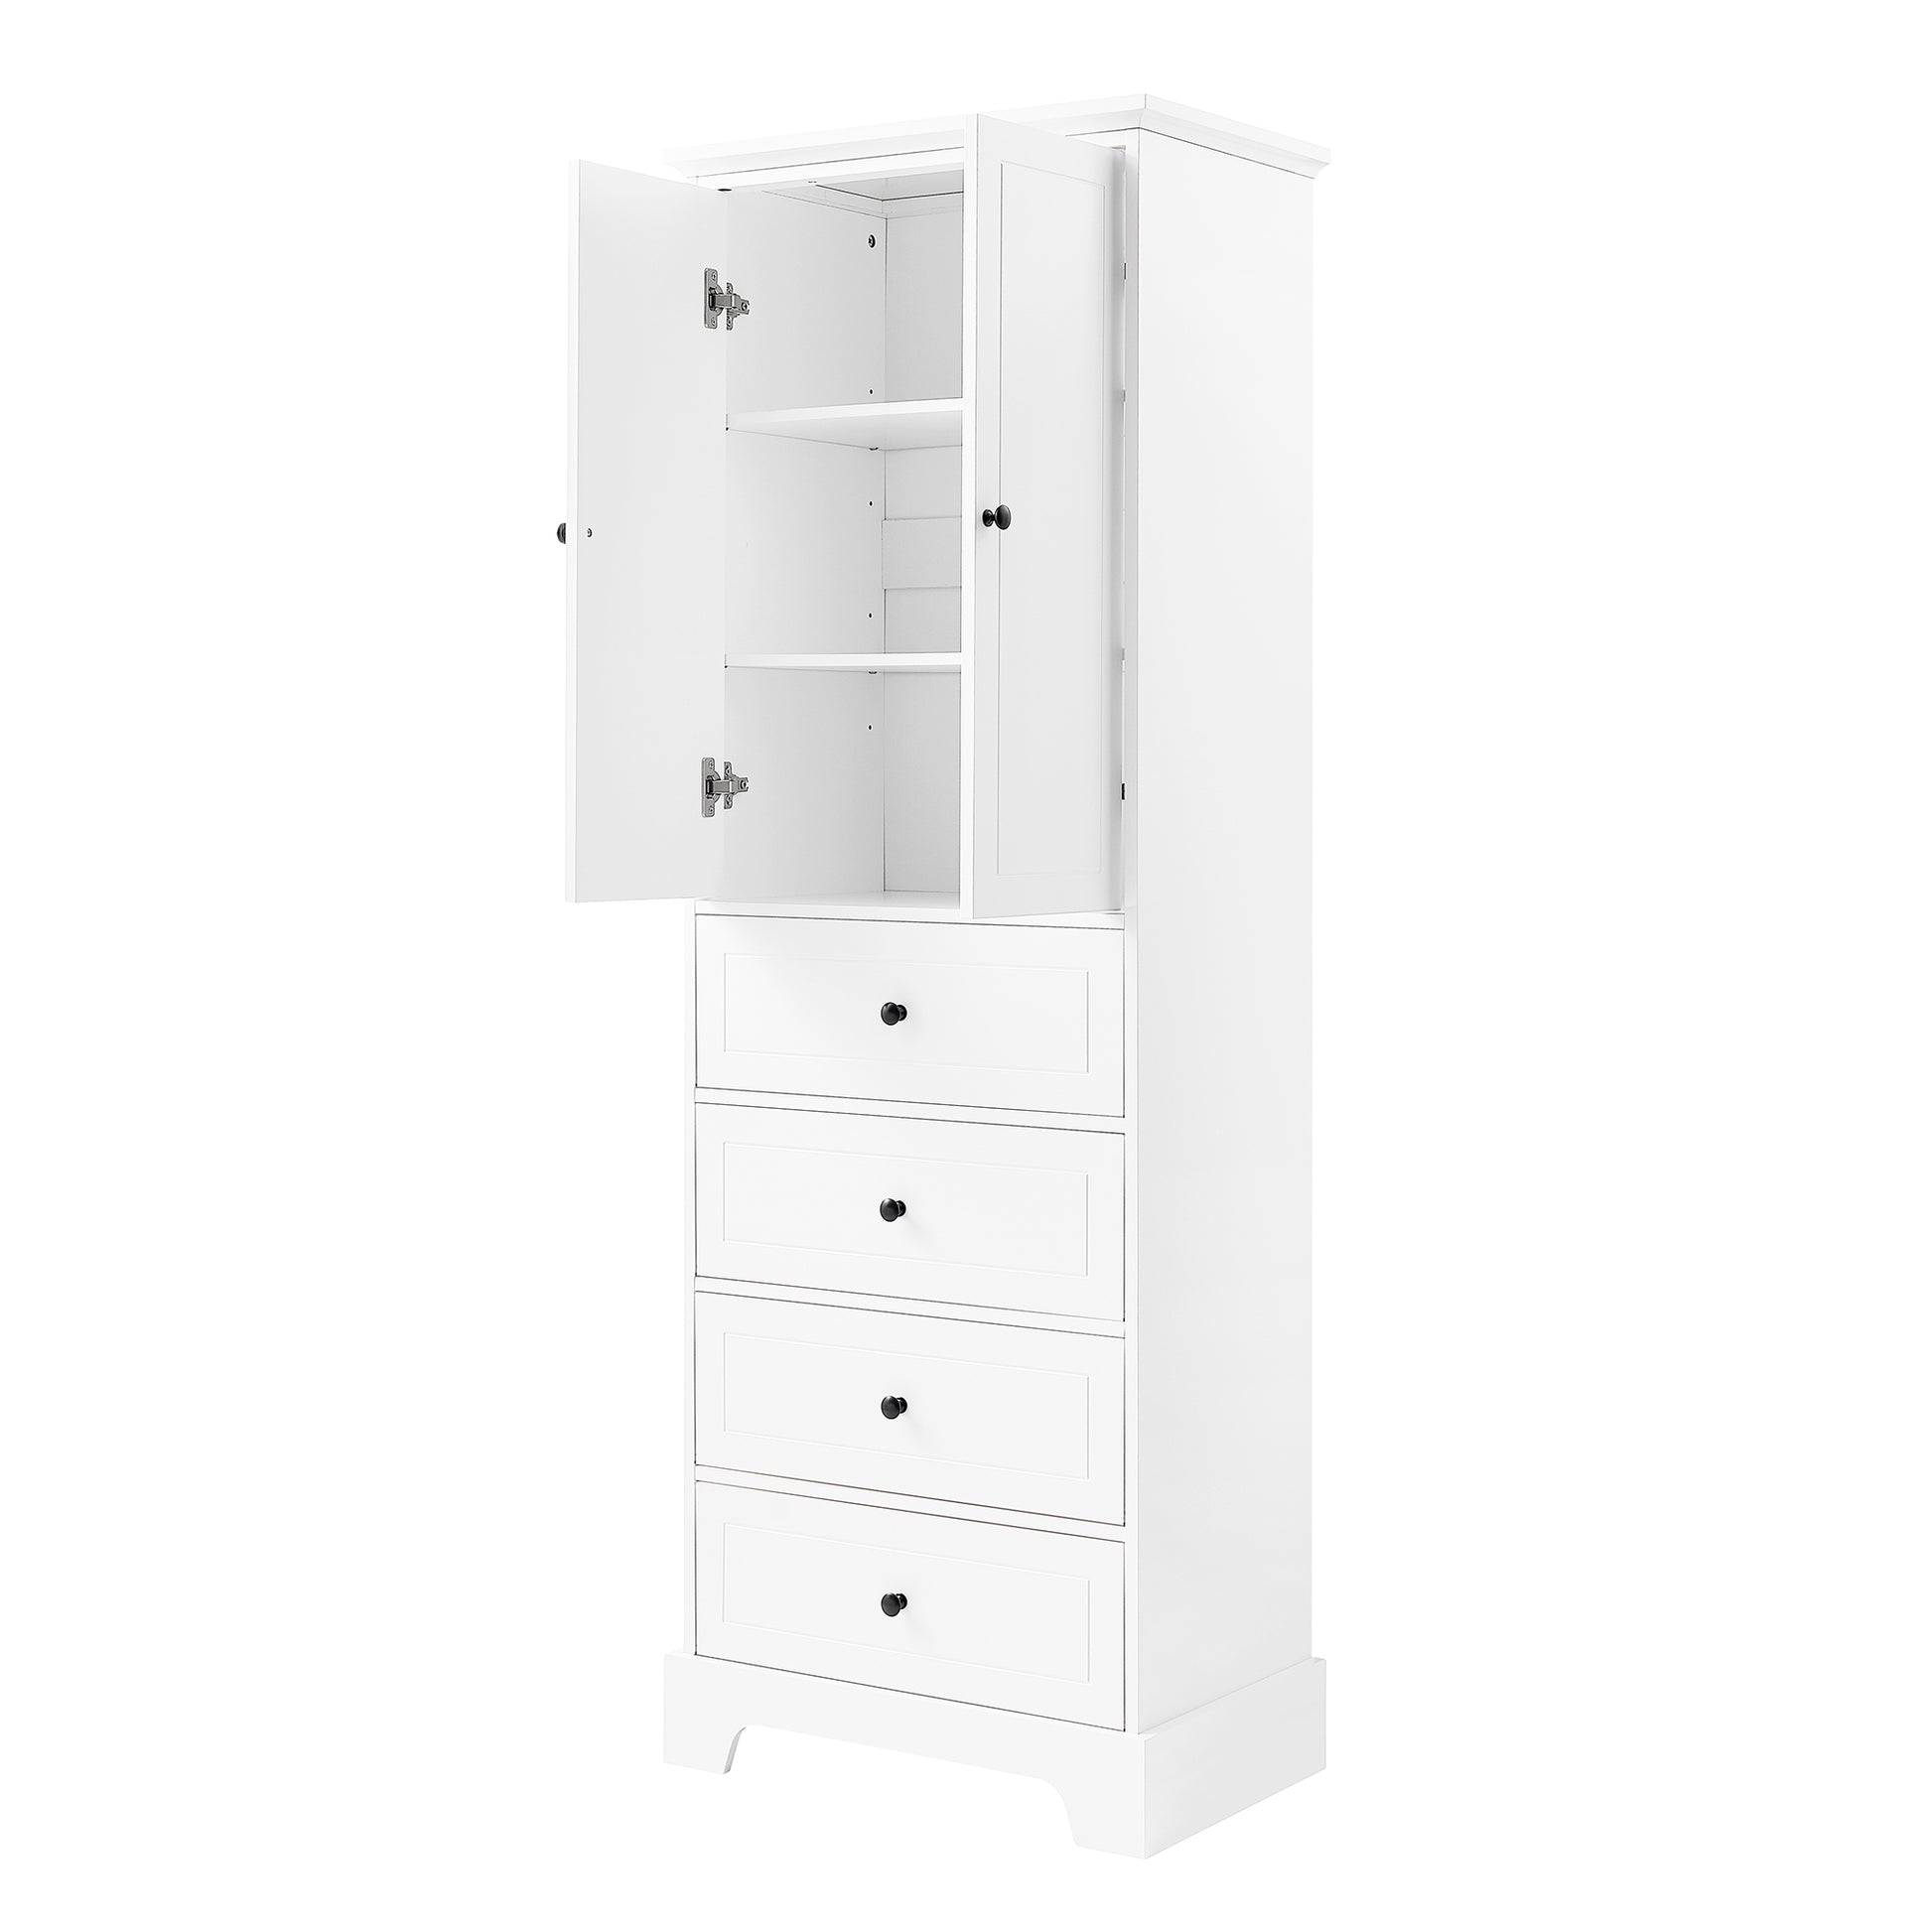 Storage Cabinet with 2 Doors and 4 Drawers for white-mdf